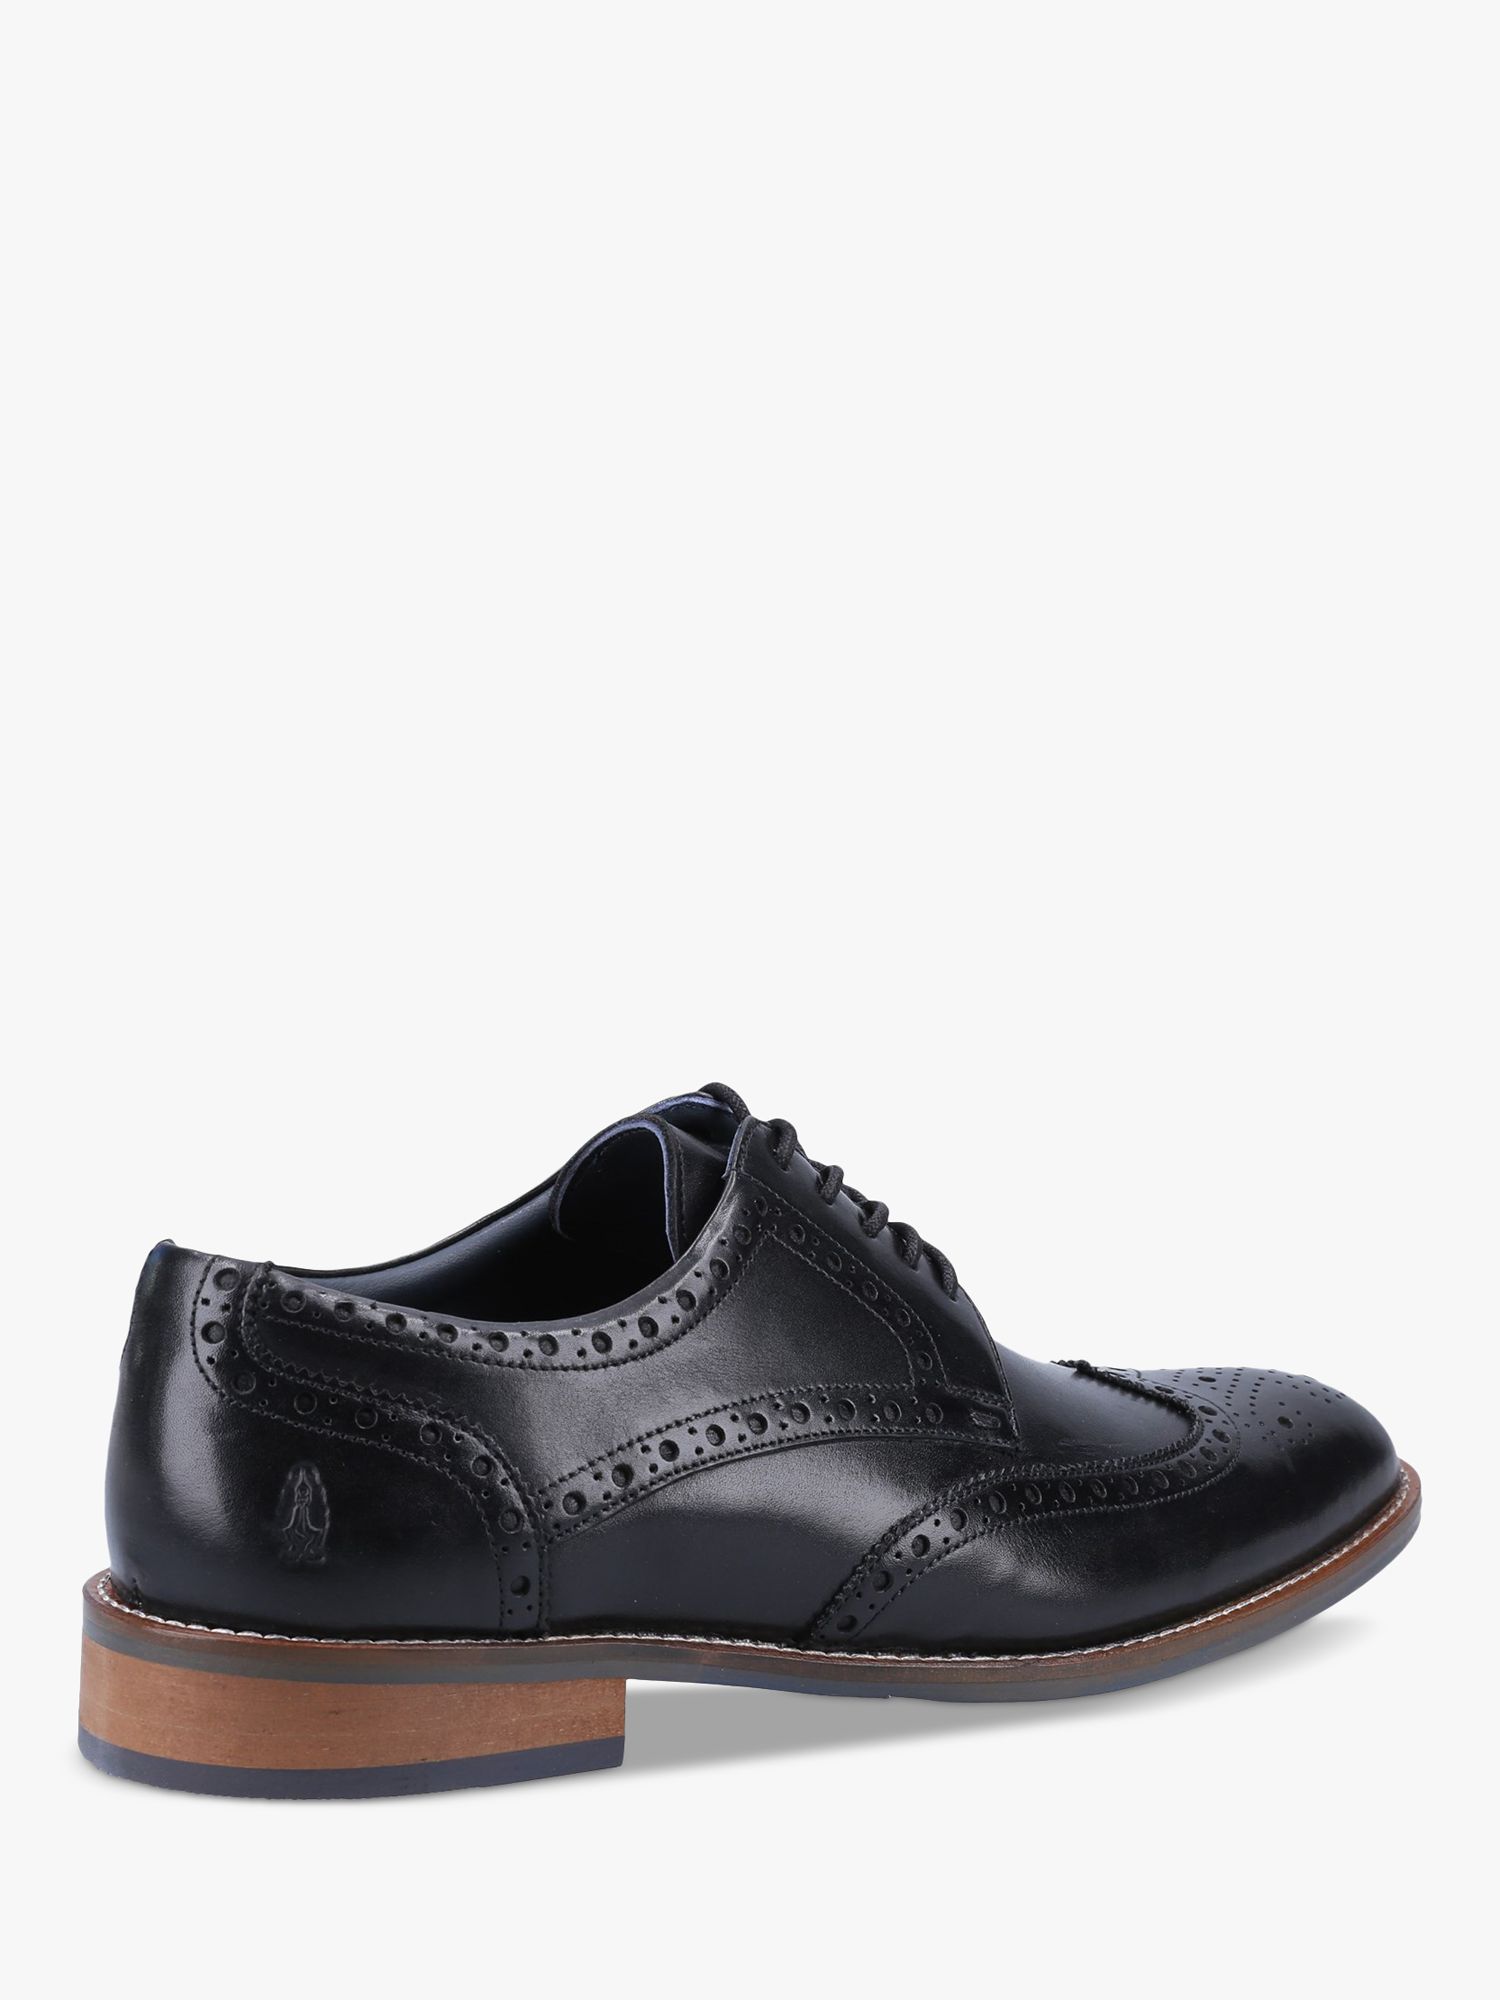 Buy Hush Puppies Dustin Leather Brogues Online at johnlewis.com